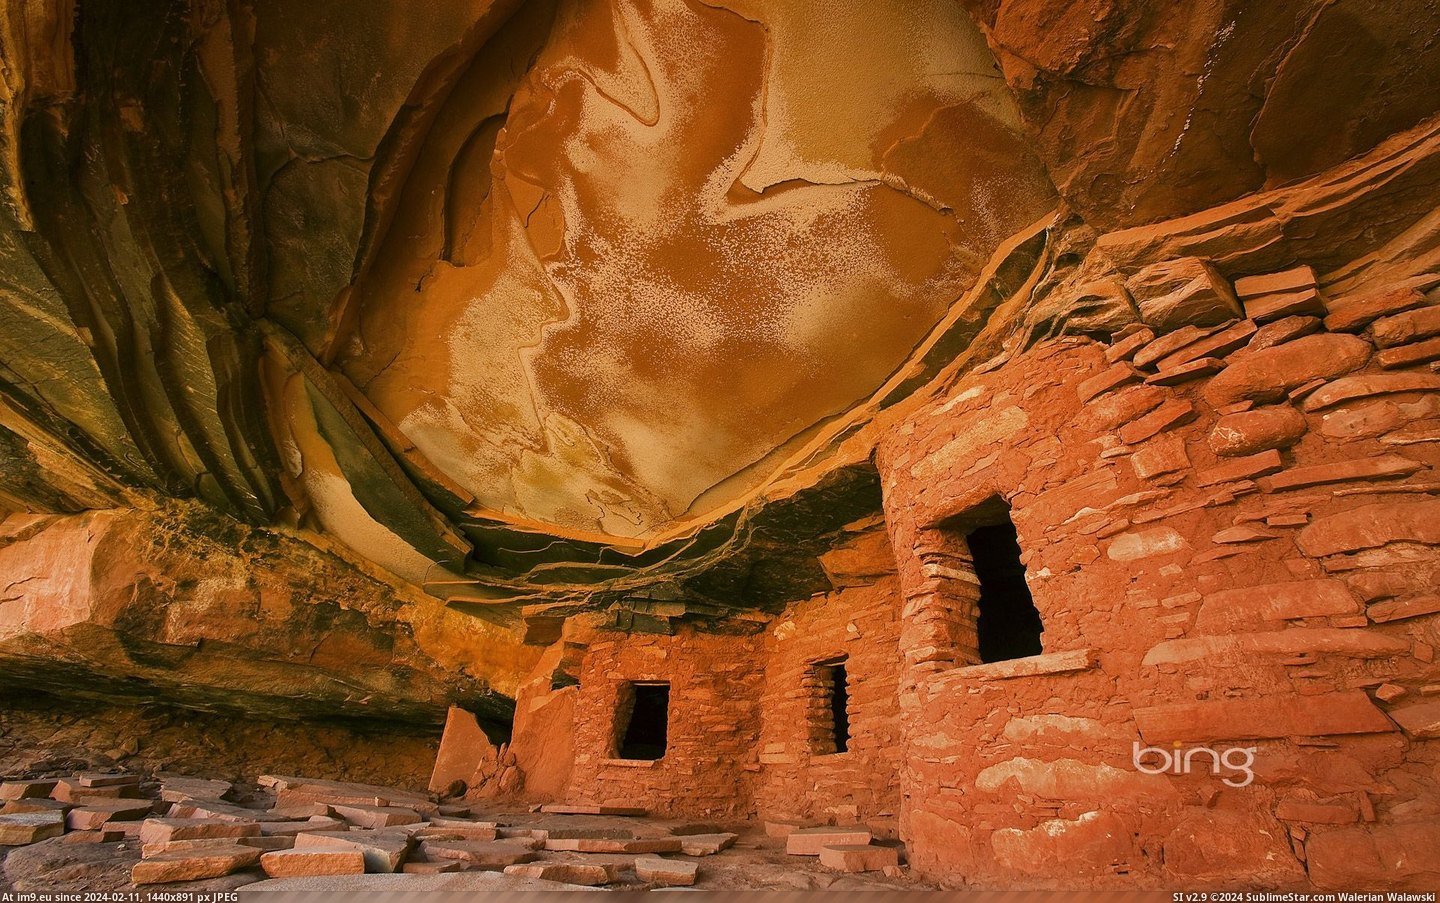 The Ceiling House (also known as Falling Roof) at Cedar Mesa, Utah (©age fotostock) (in Best photos of January 2013)